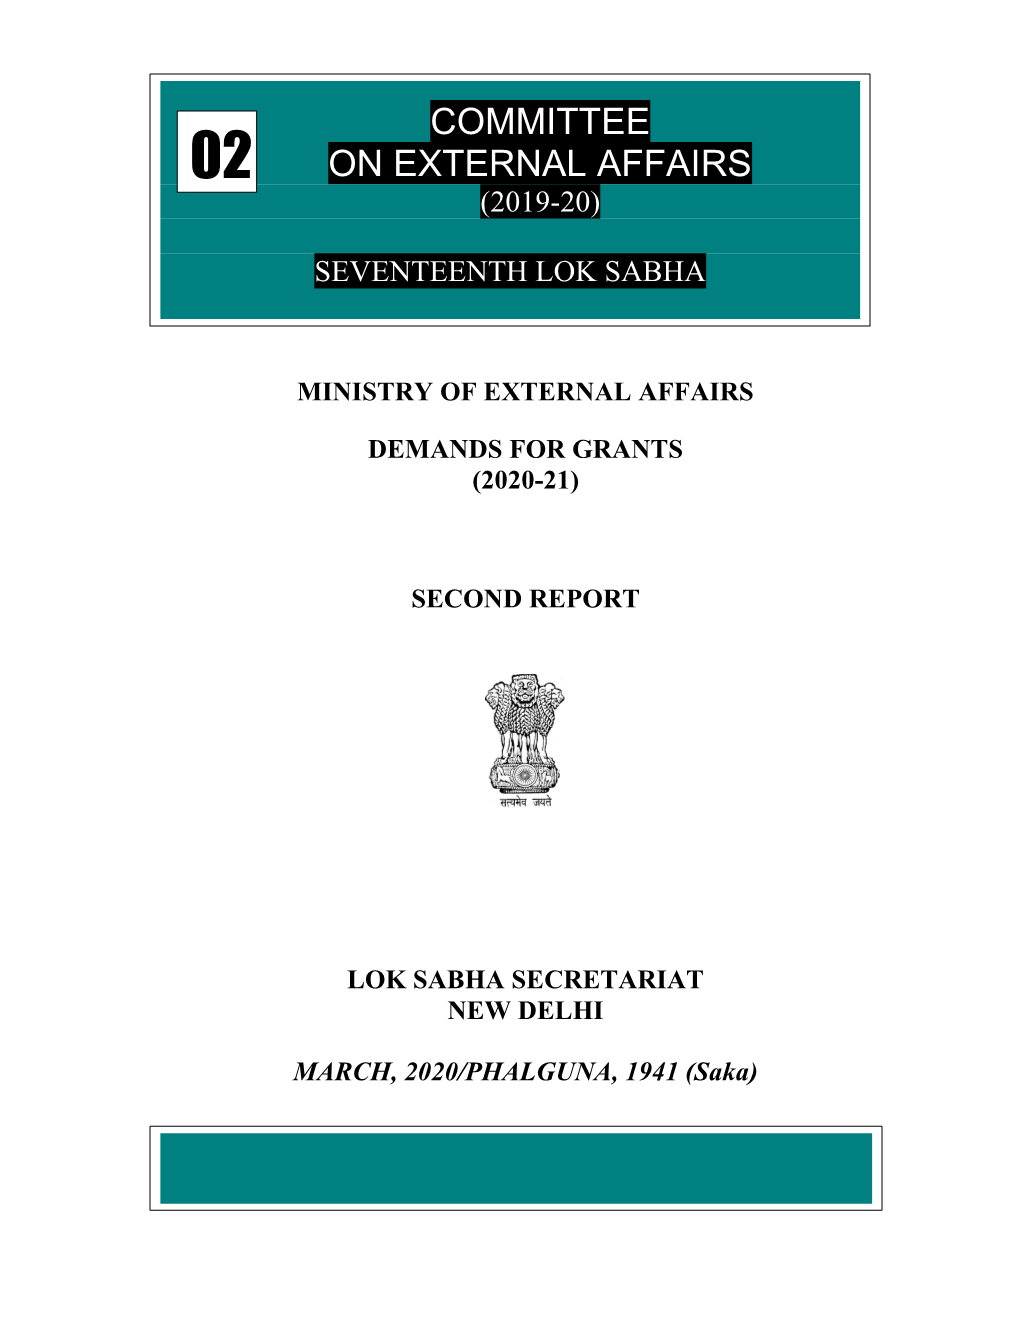 Ministry of External Affairs Demands for Grants (2020-21)